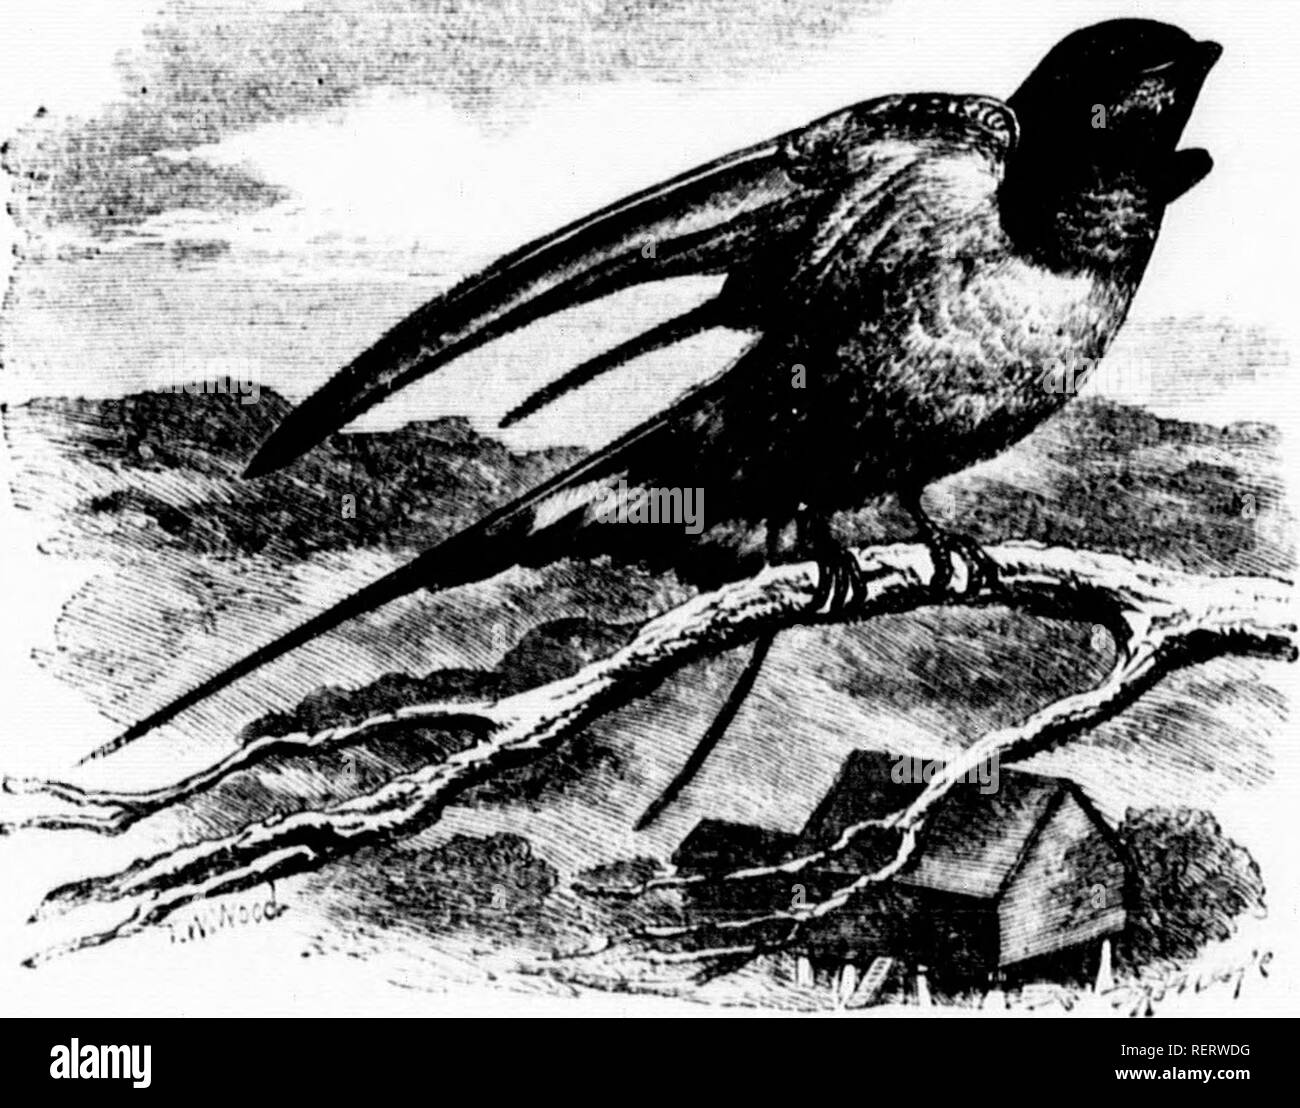 Boon fly Black and White Stock Photos & Images - Alamy